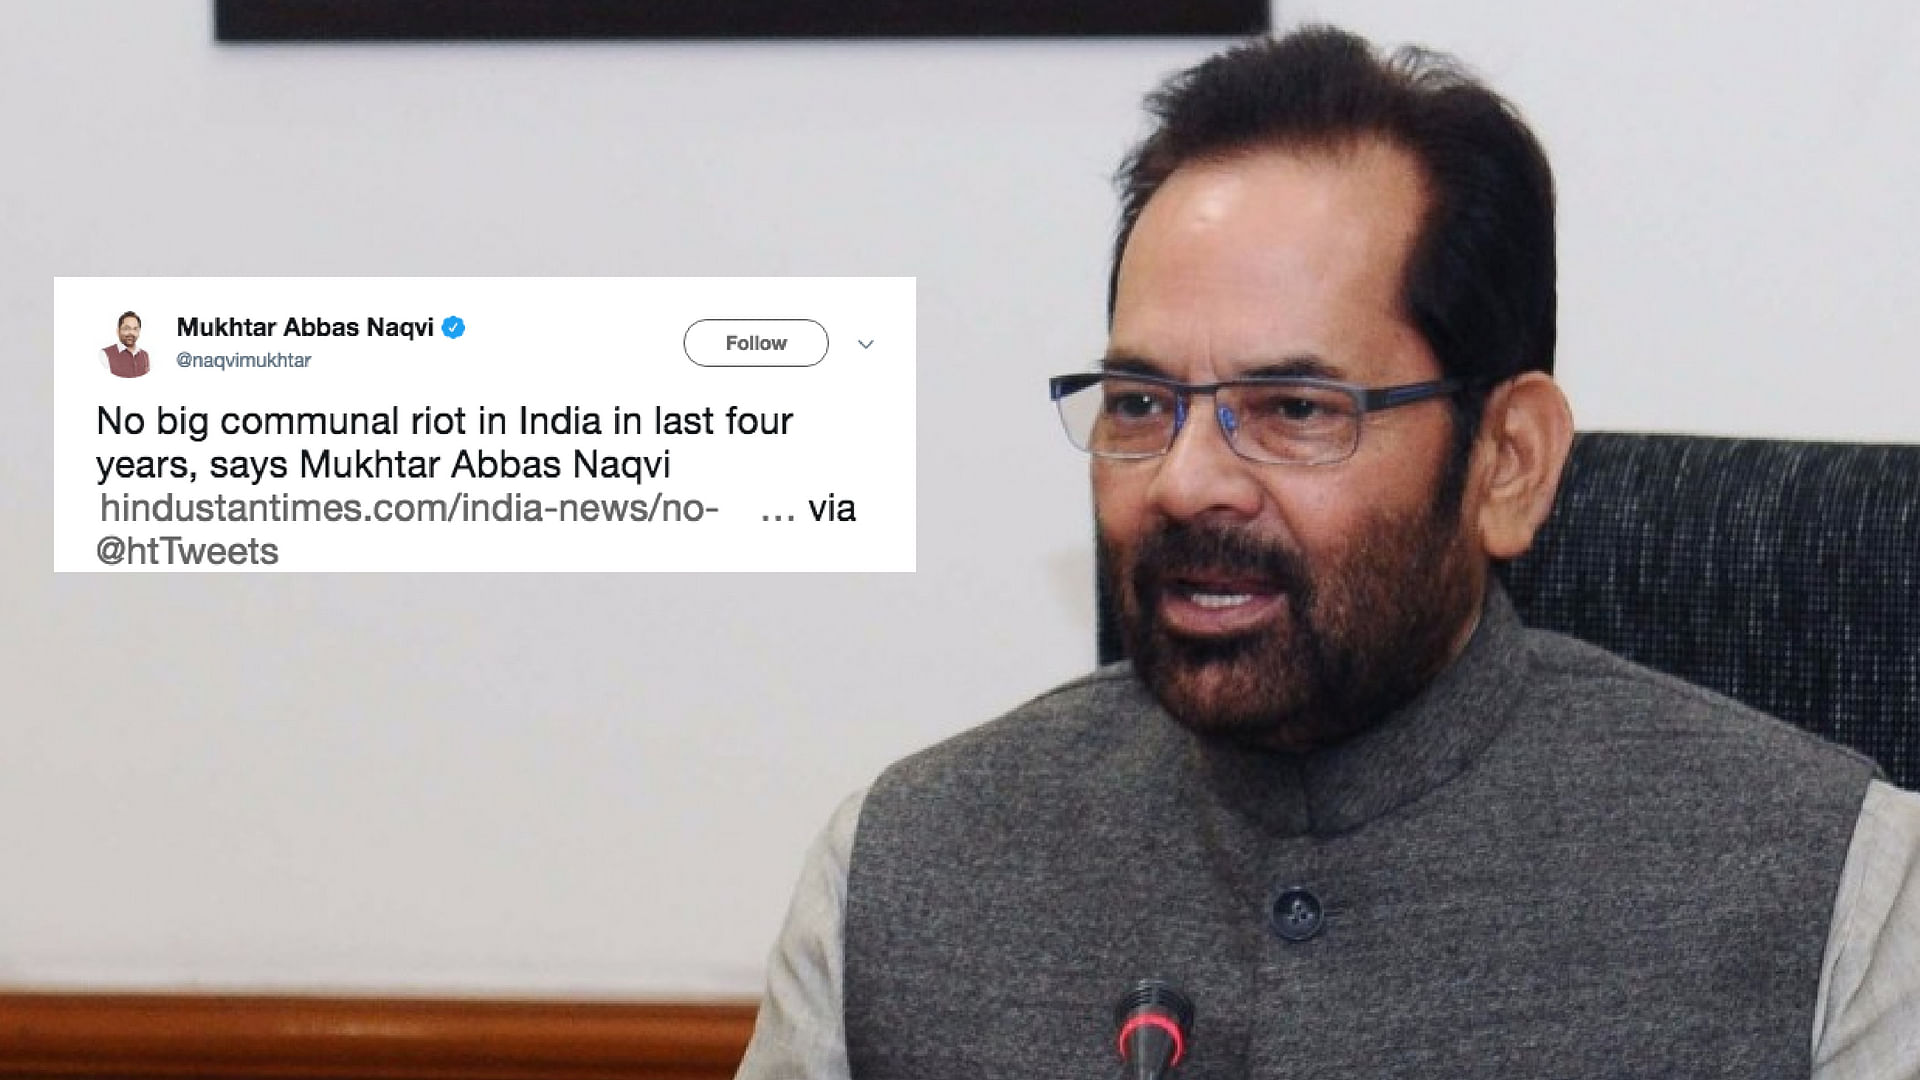 Naqvi’s claim is not true, according to FactChecker’s analysis of government data. 